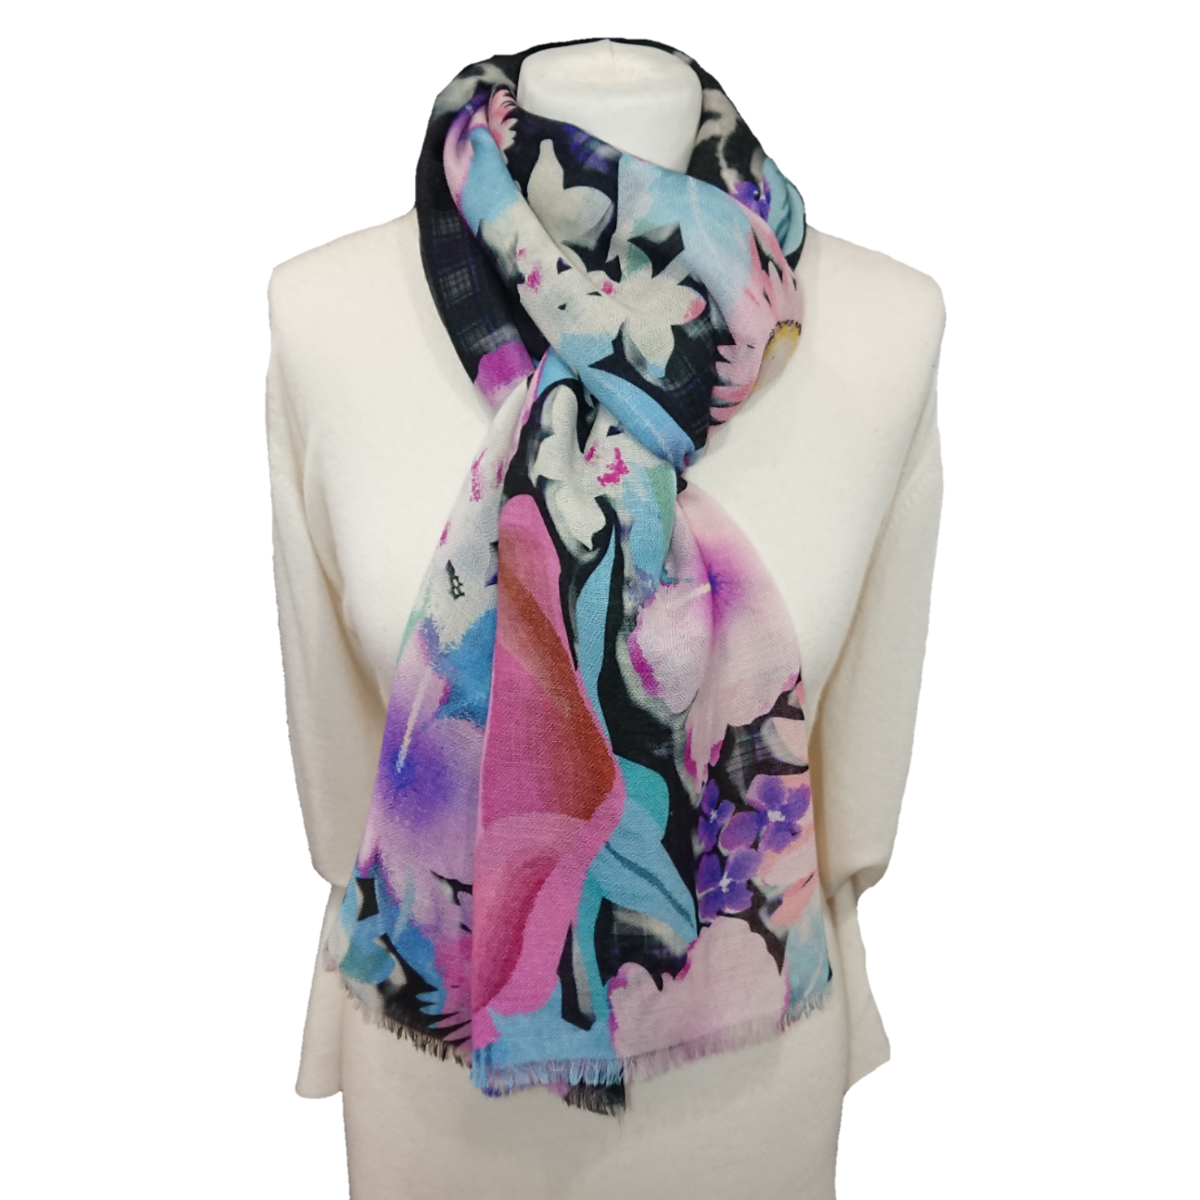 Ltd Edition 100% Pure Pashmina Cashmere Stole - Large Scarf - Pink and Blue Flowers Print